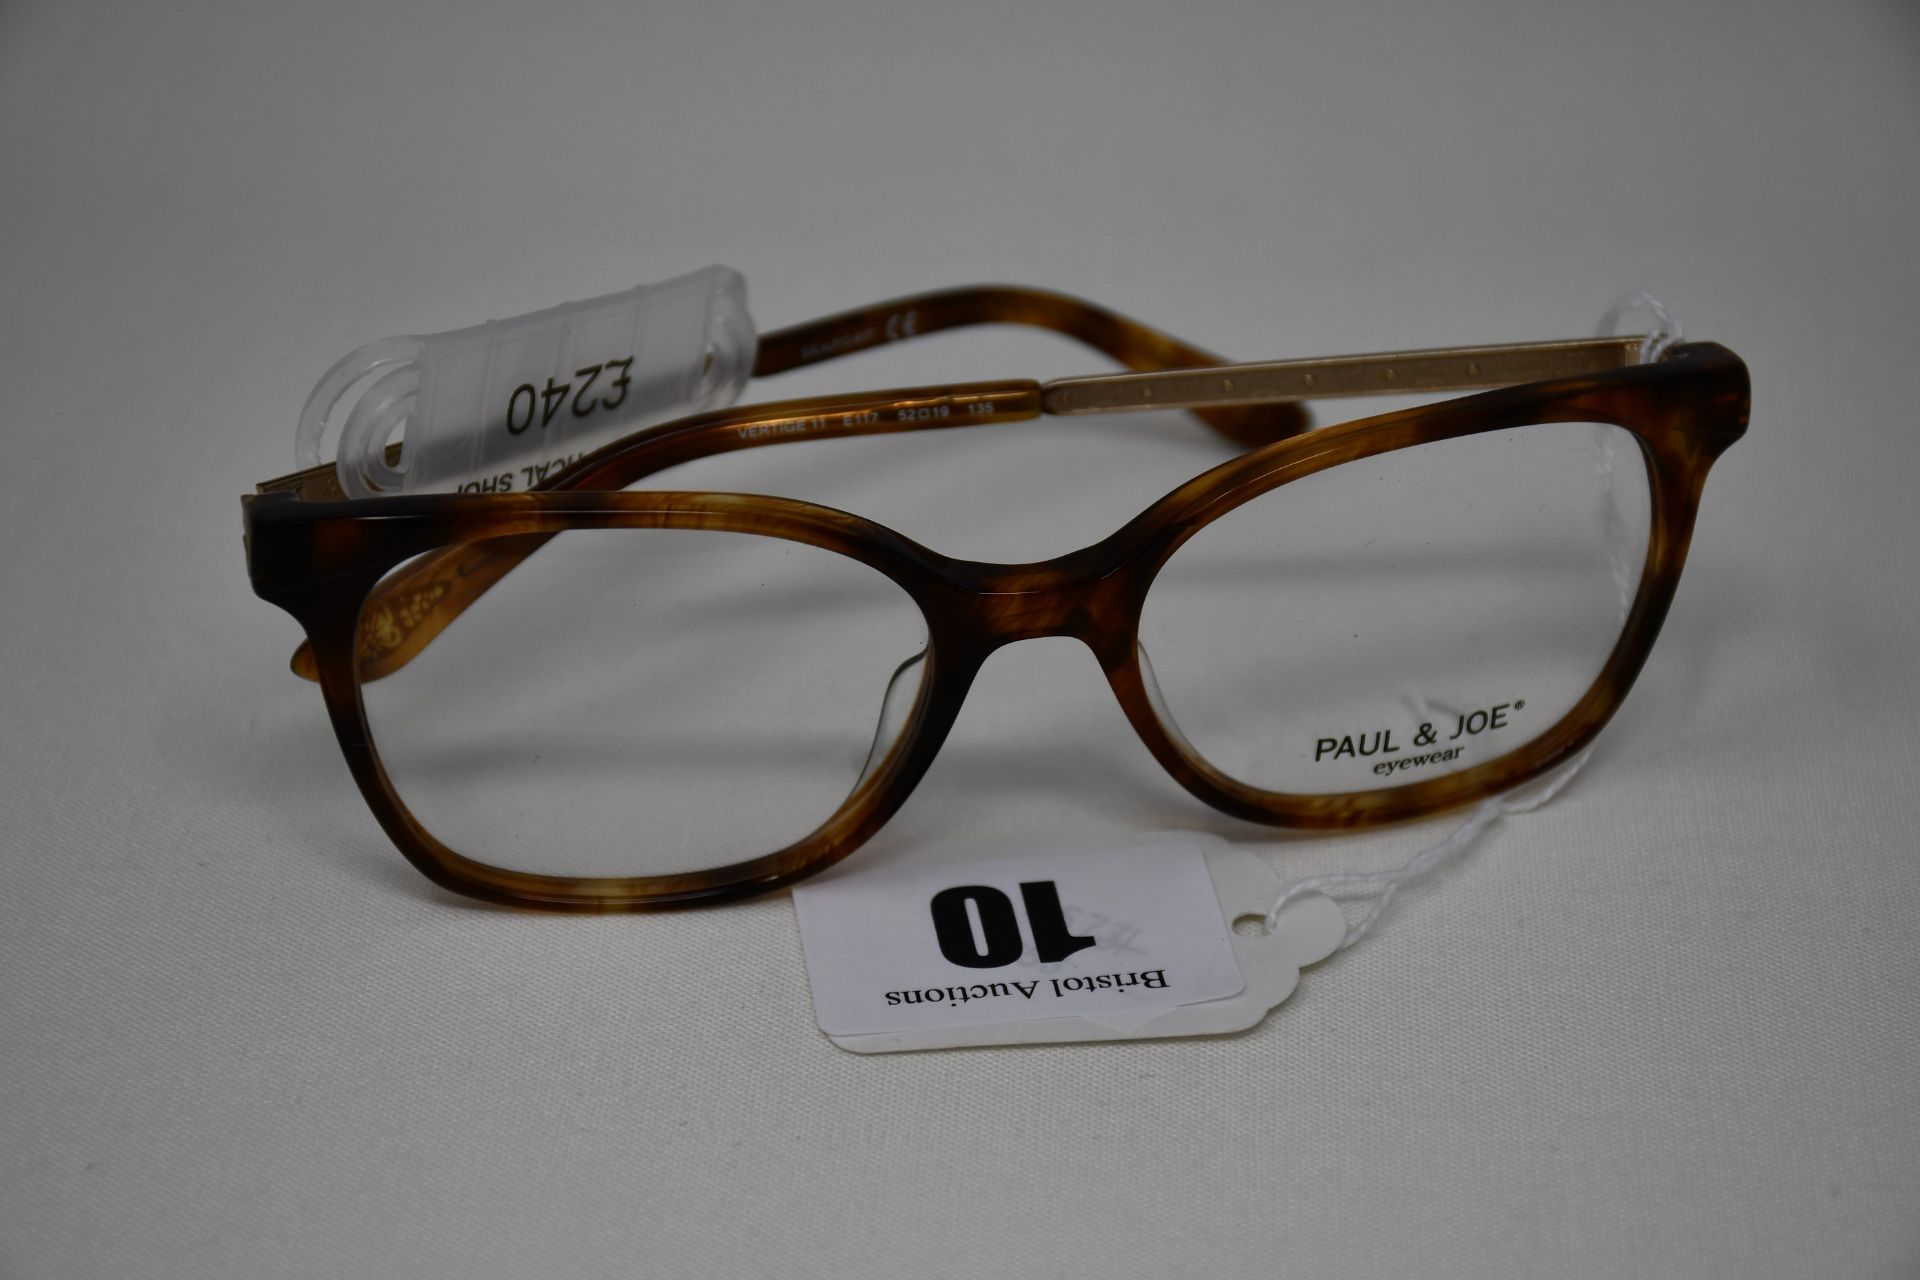 A pair of as new Paul & Joe glasses frames with clear glass (RRP £240).